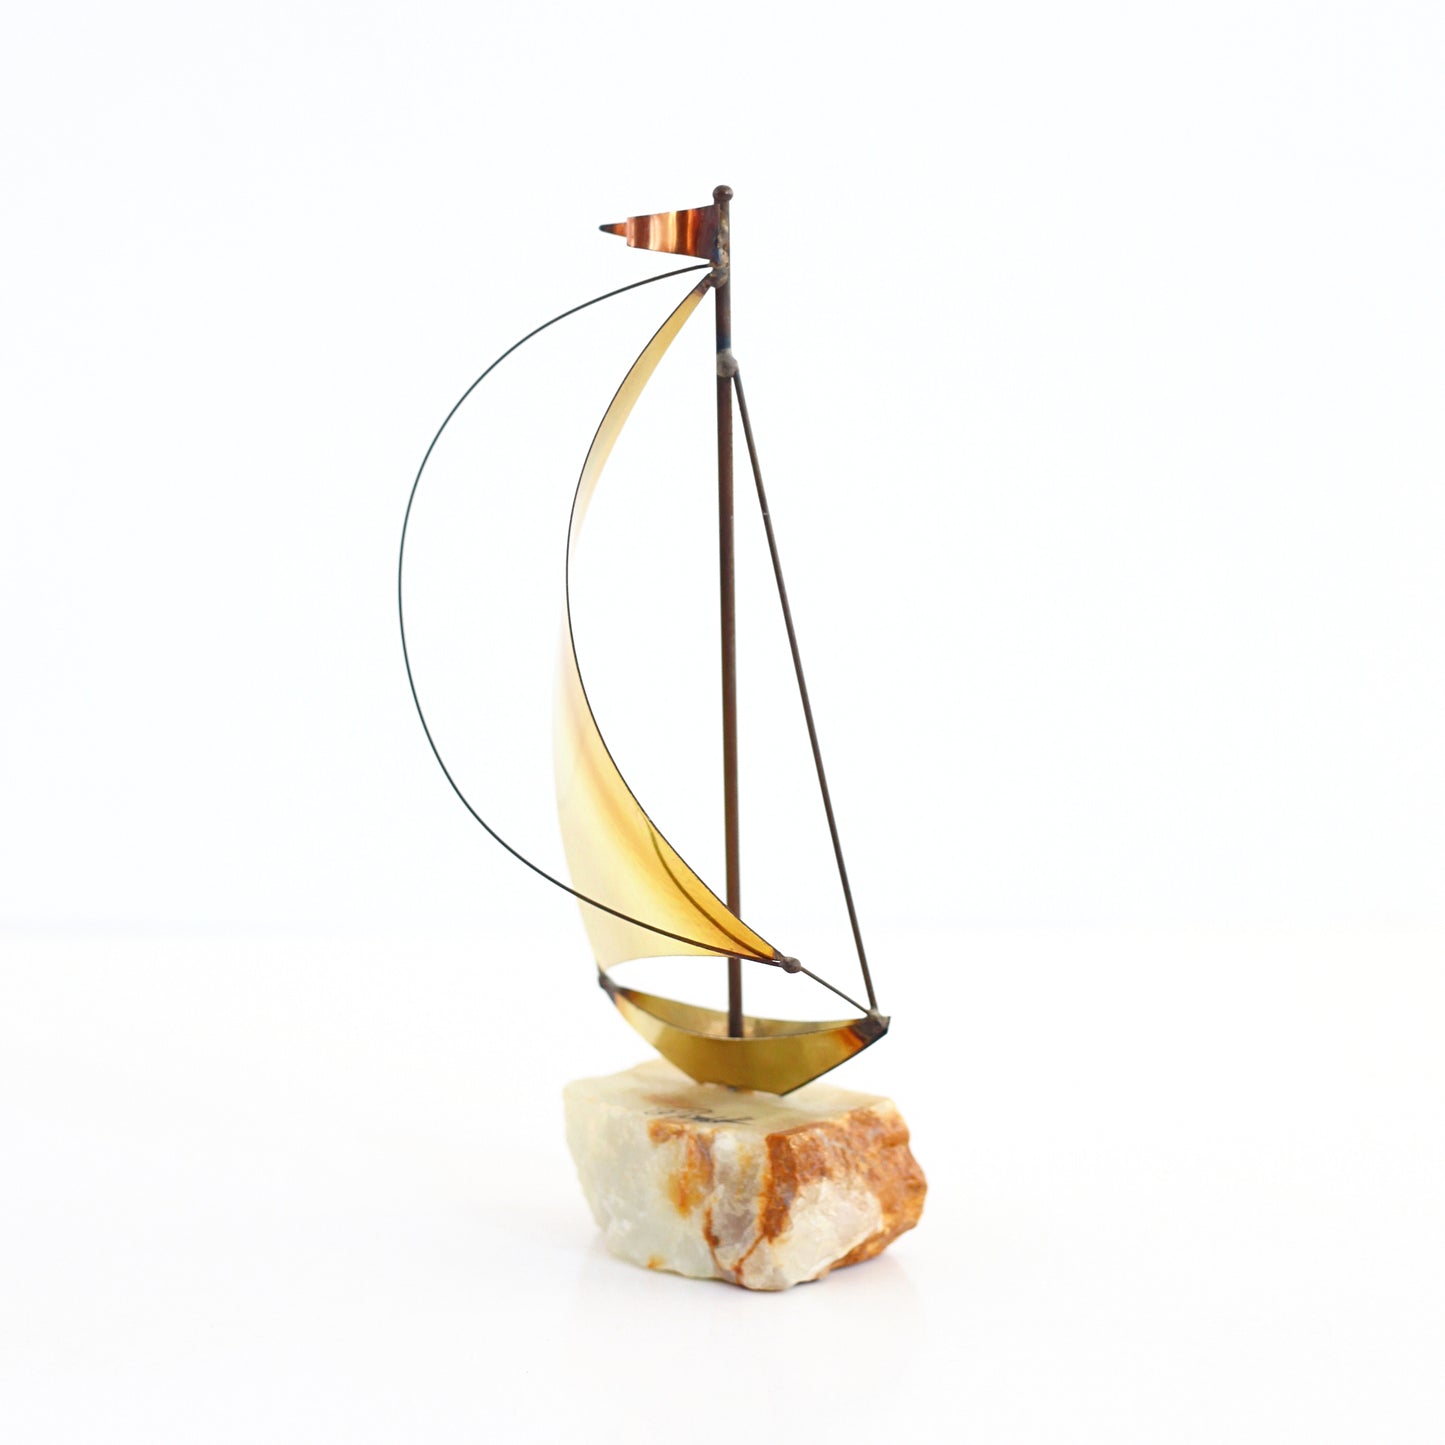 SOLD - Mid Century DeMott Brass & Copper Sailboat Sculpture with Onyx Base